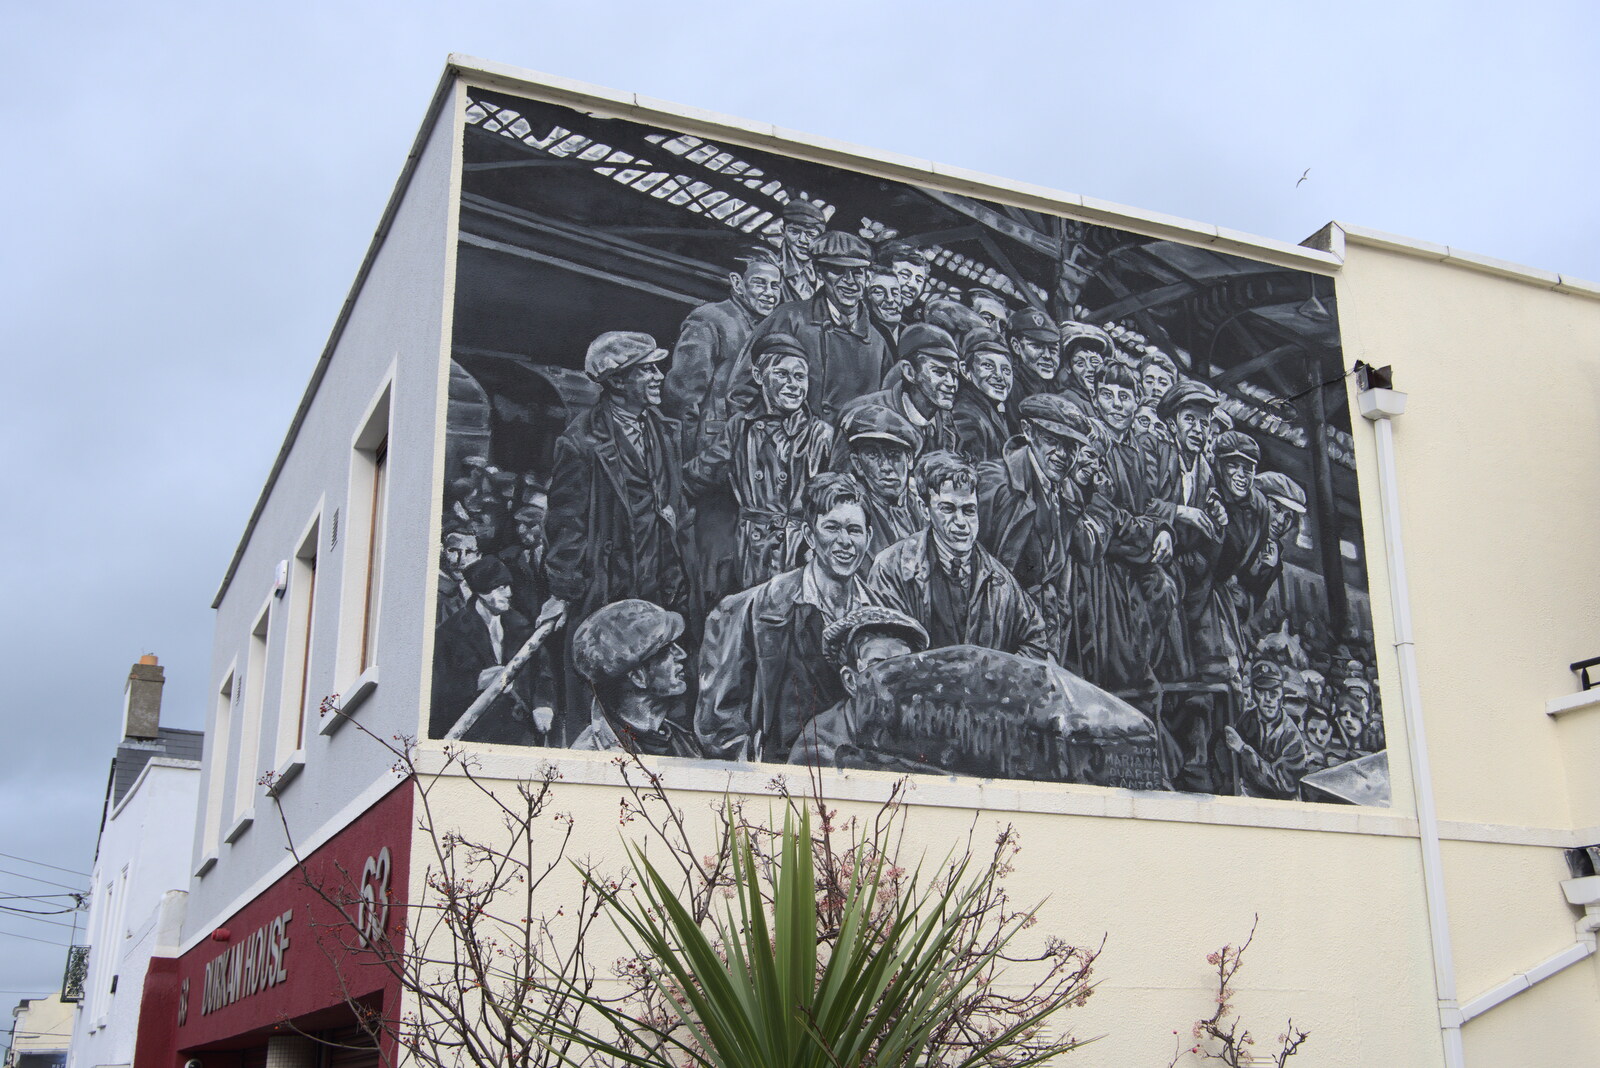 The End of the Breffni, Blackrock, Dublin - 18th February 2023: A big mural on a wall on York Road